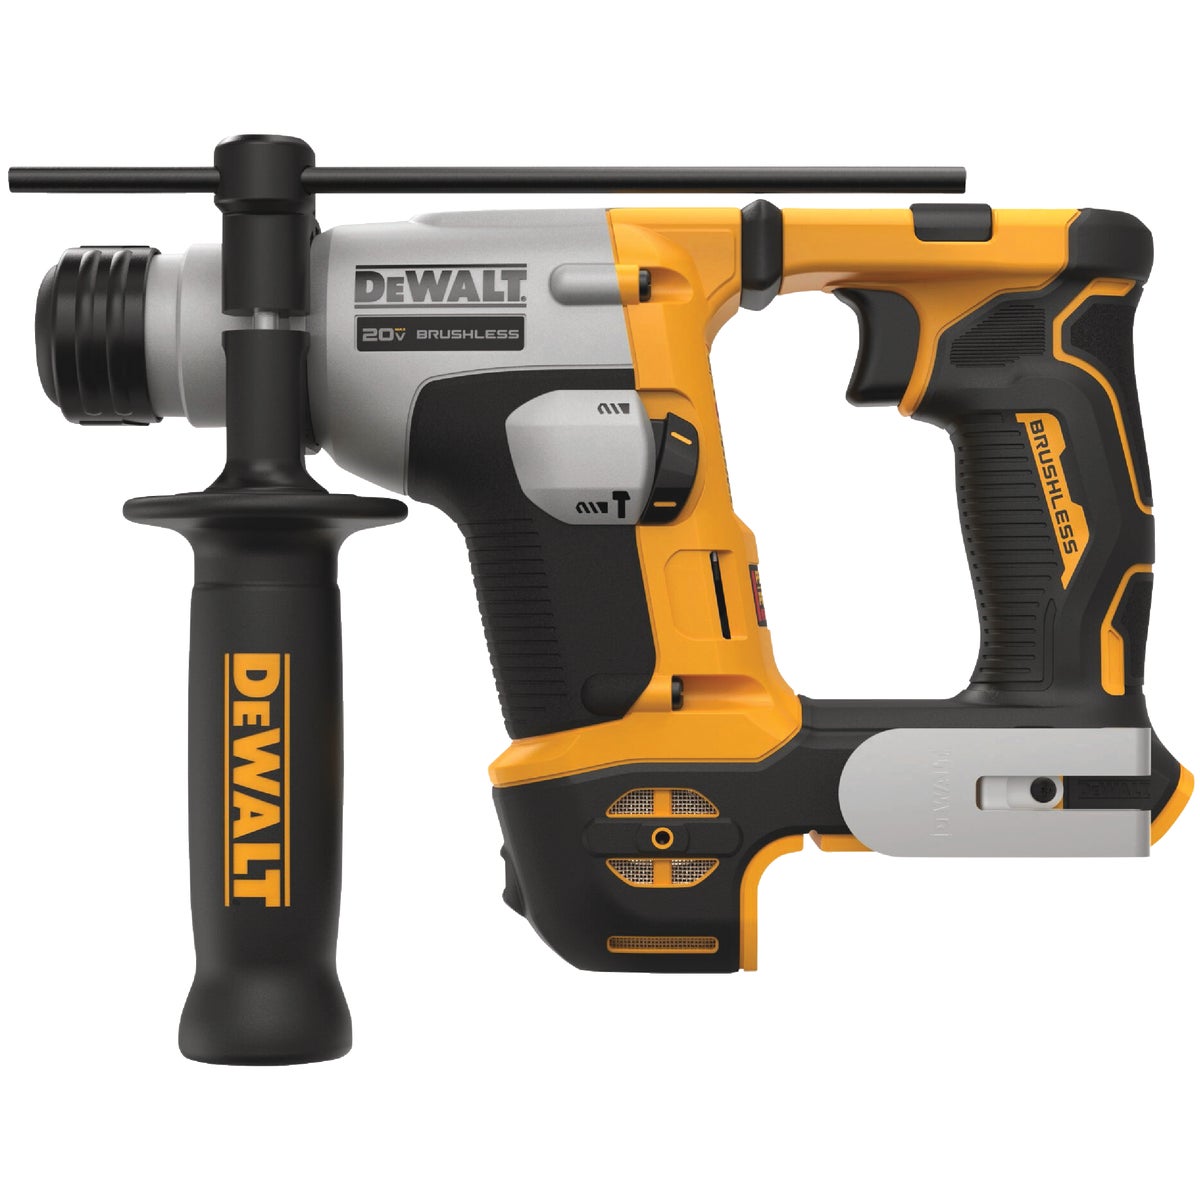 DEWALT ATOMIC 20V MAX Lithium-Ion 5/8 In. Brushless SDS Plus Cordless Rotary Hammer Drill (Tool Only)